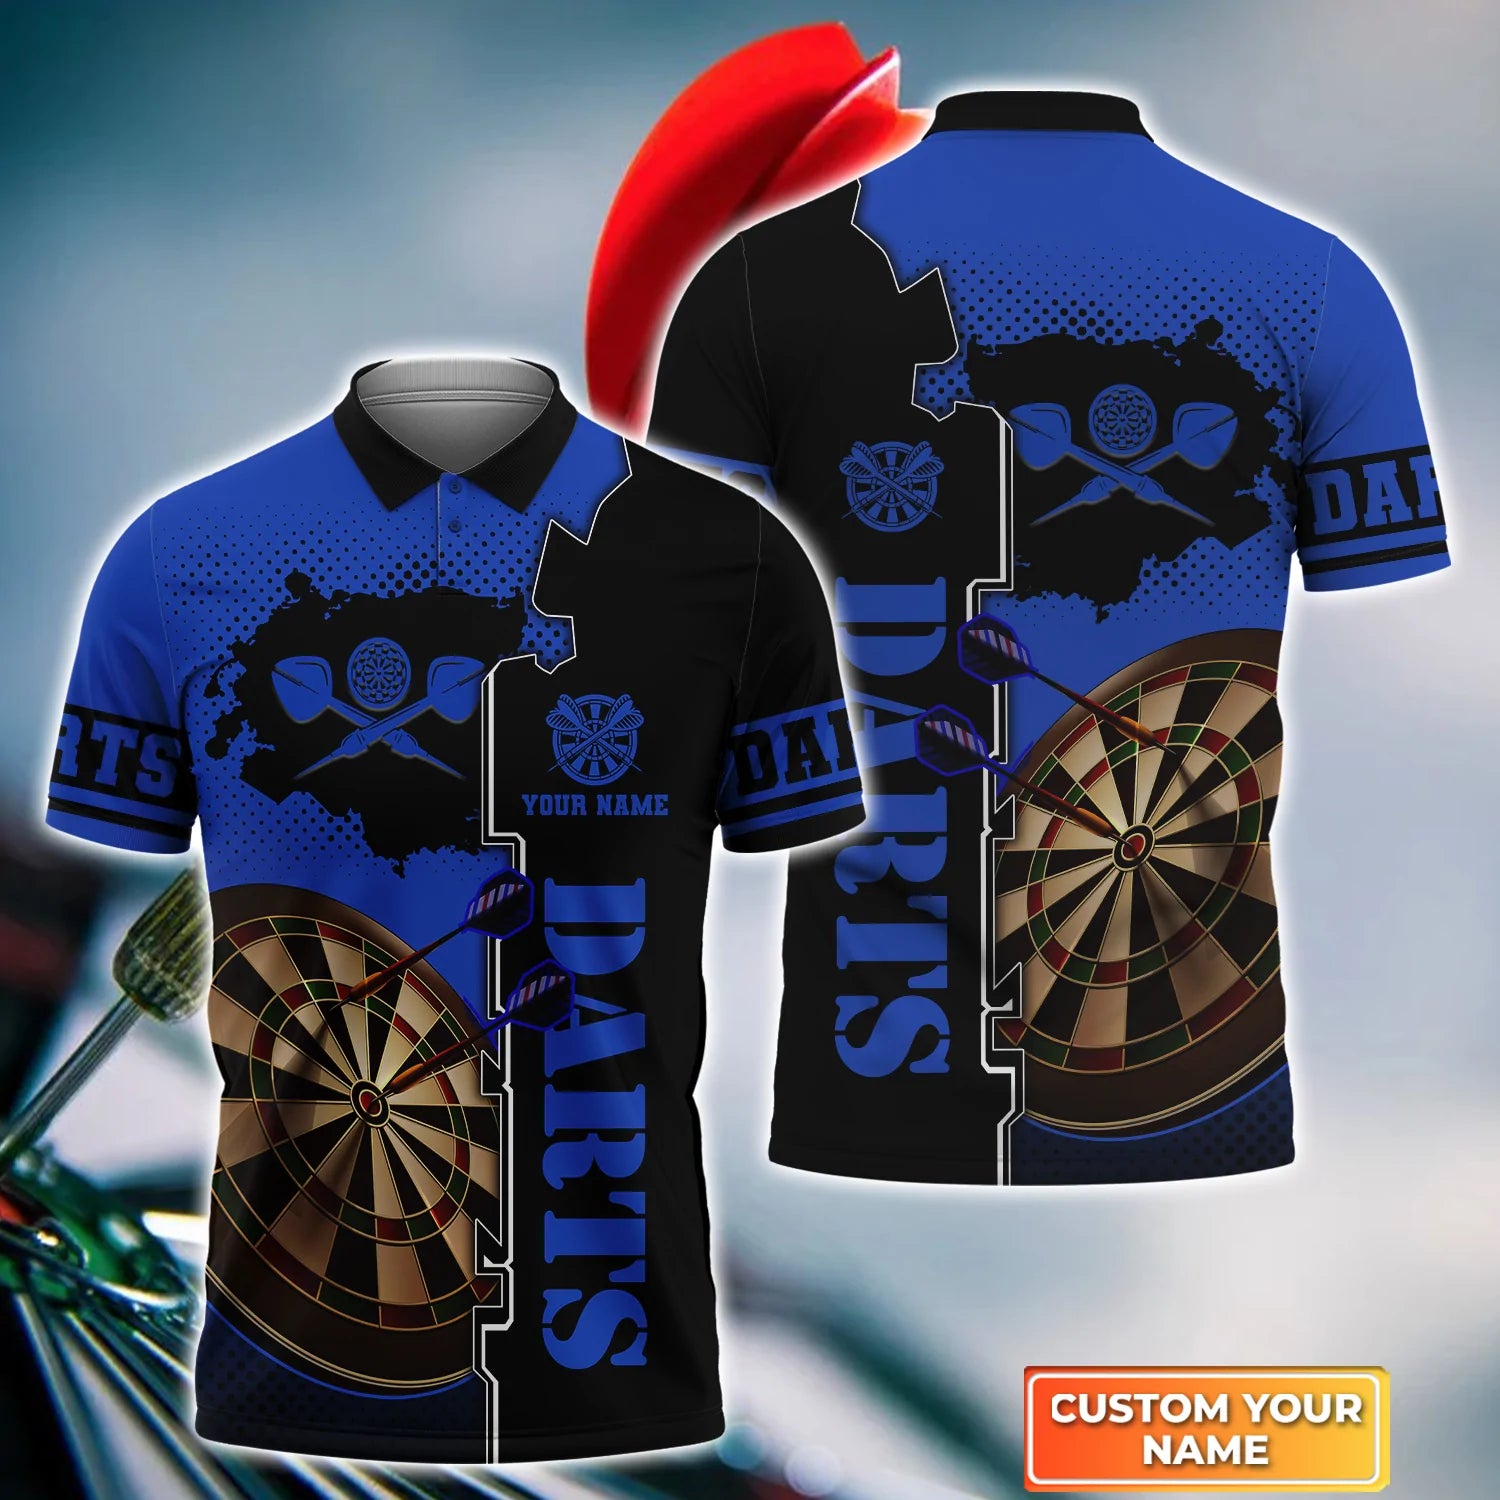 Personalized 3D Polo Shirt with Name and Blue Dartboard Design for Darts Team Players, Men’s Dart Polo Shirt, Team Dart Shirts – DP111